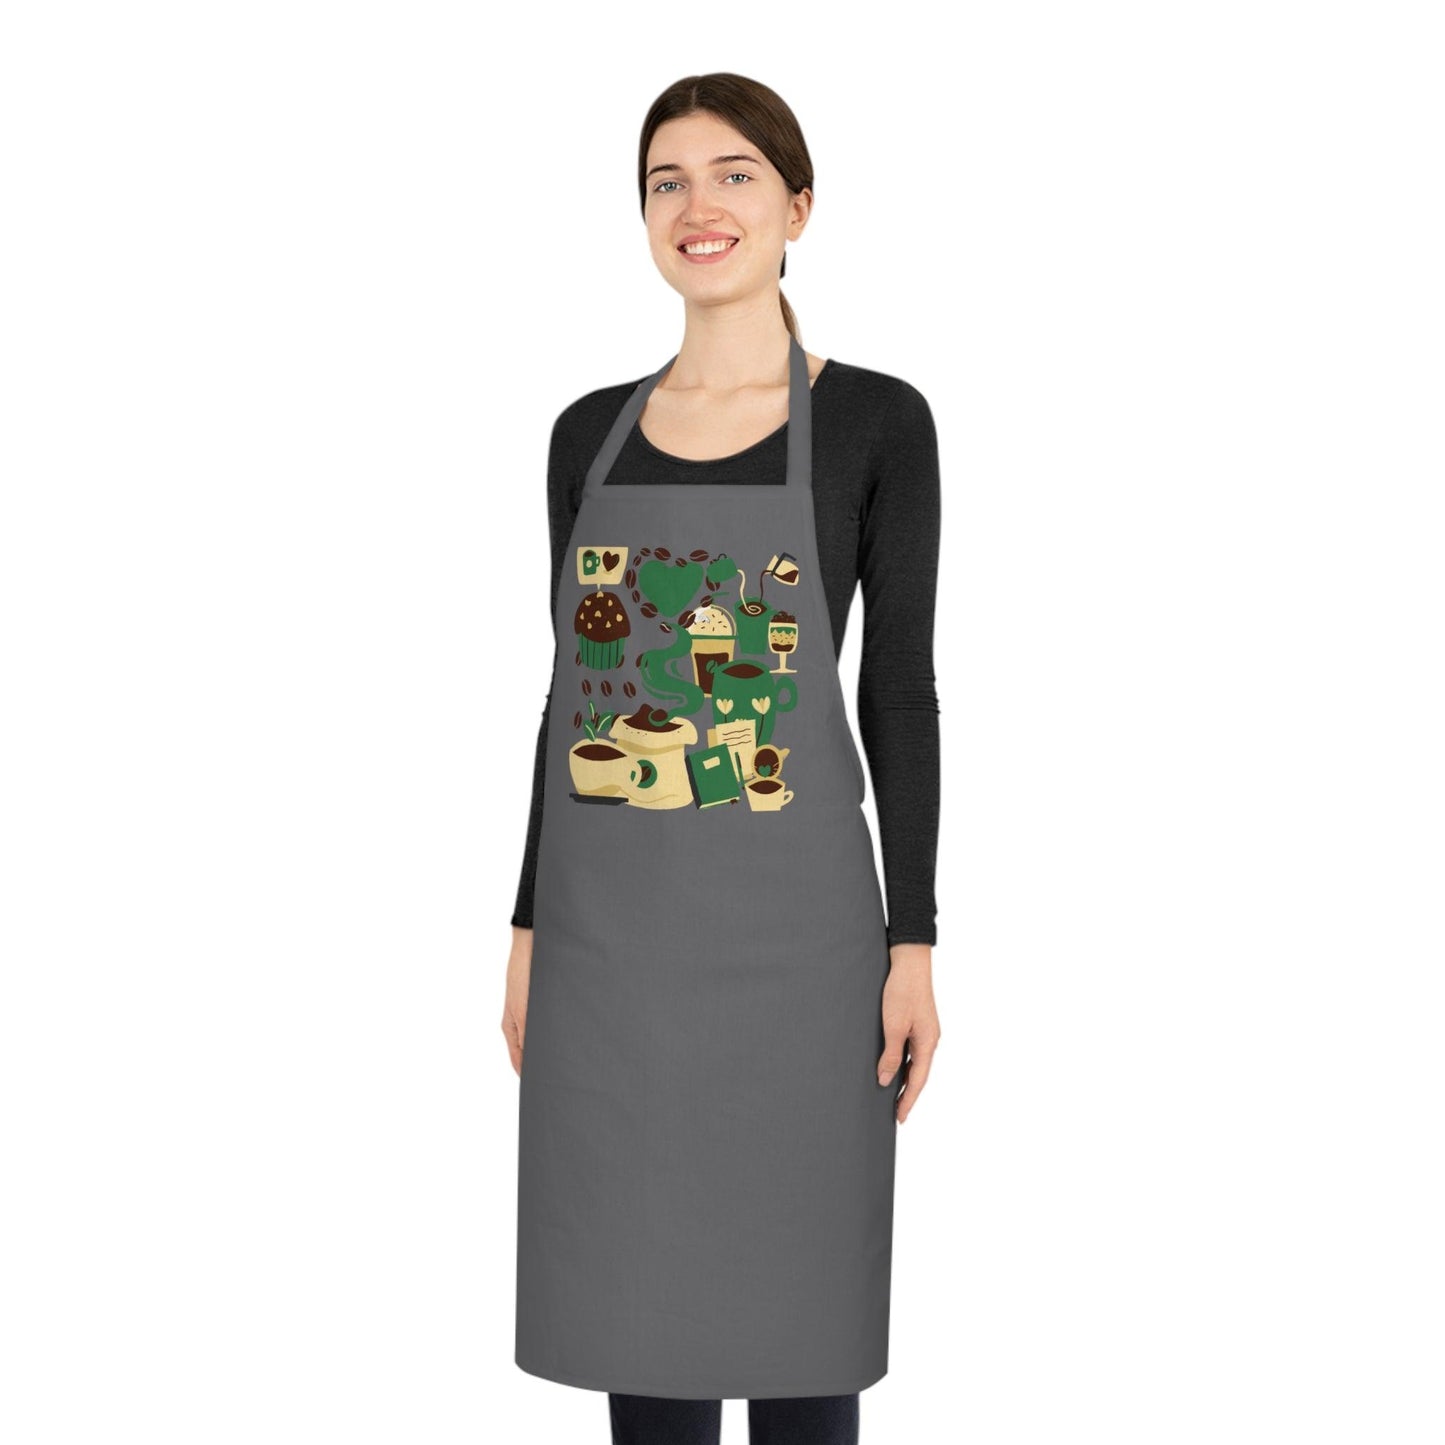 Cooking & Baking Adult Apron - COFFEEBRE